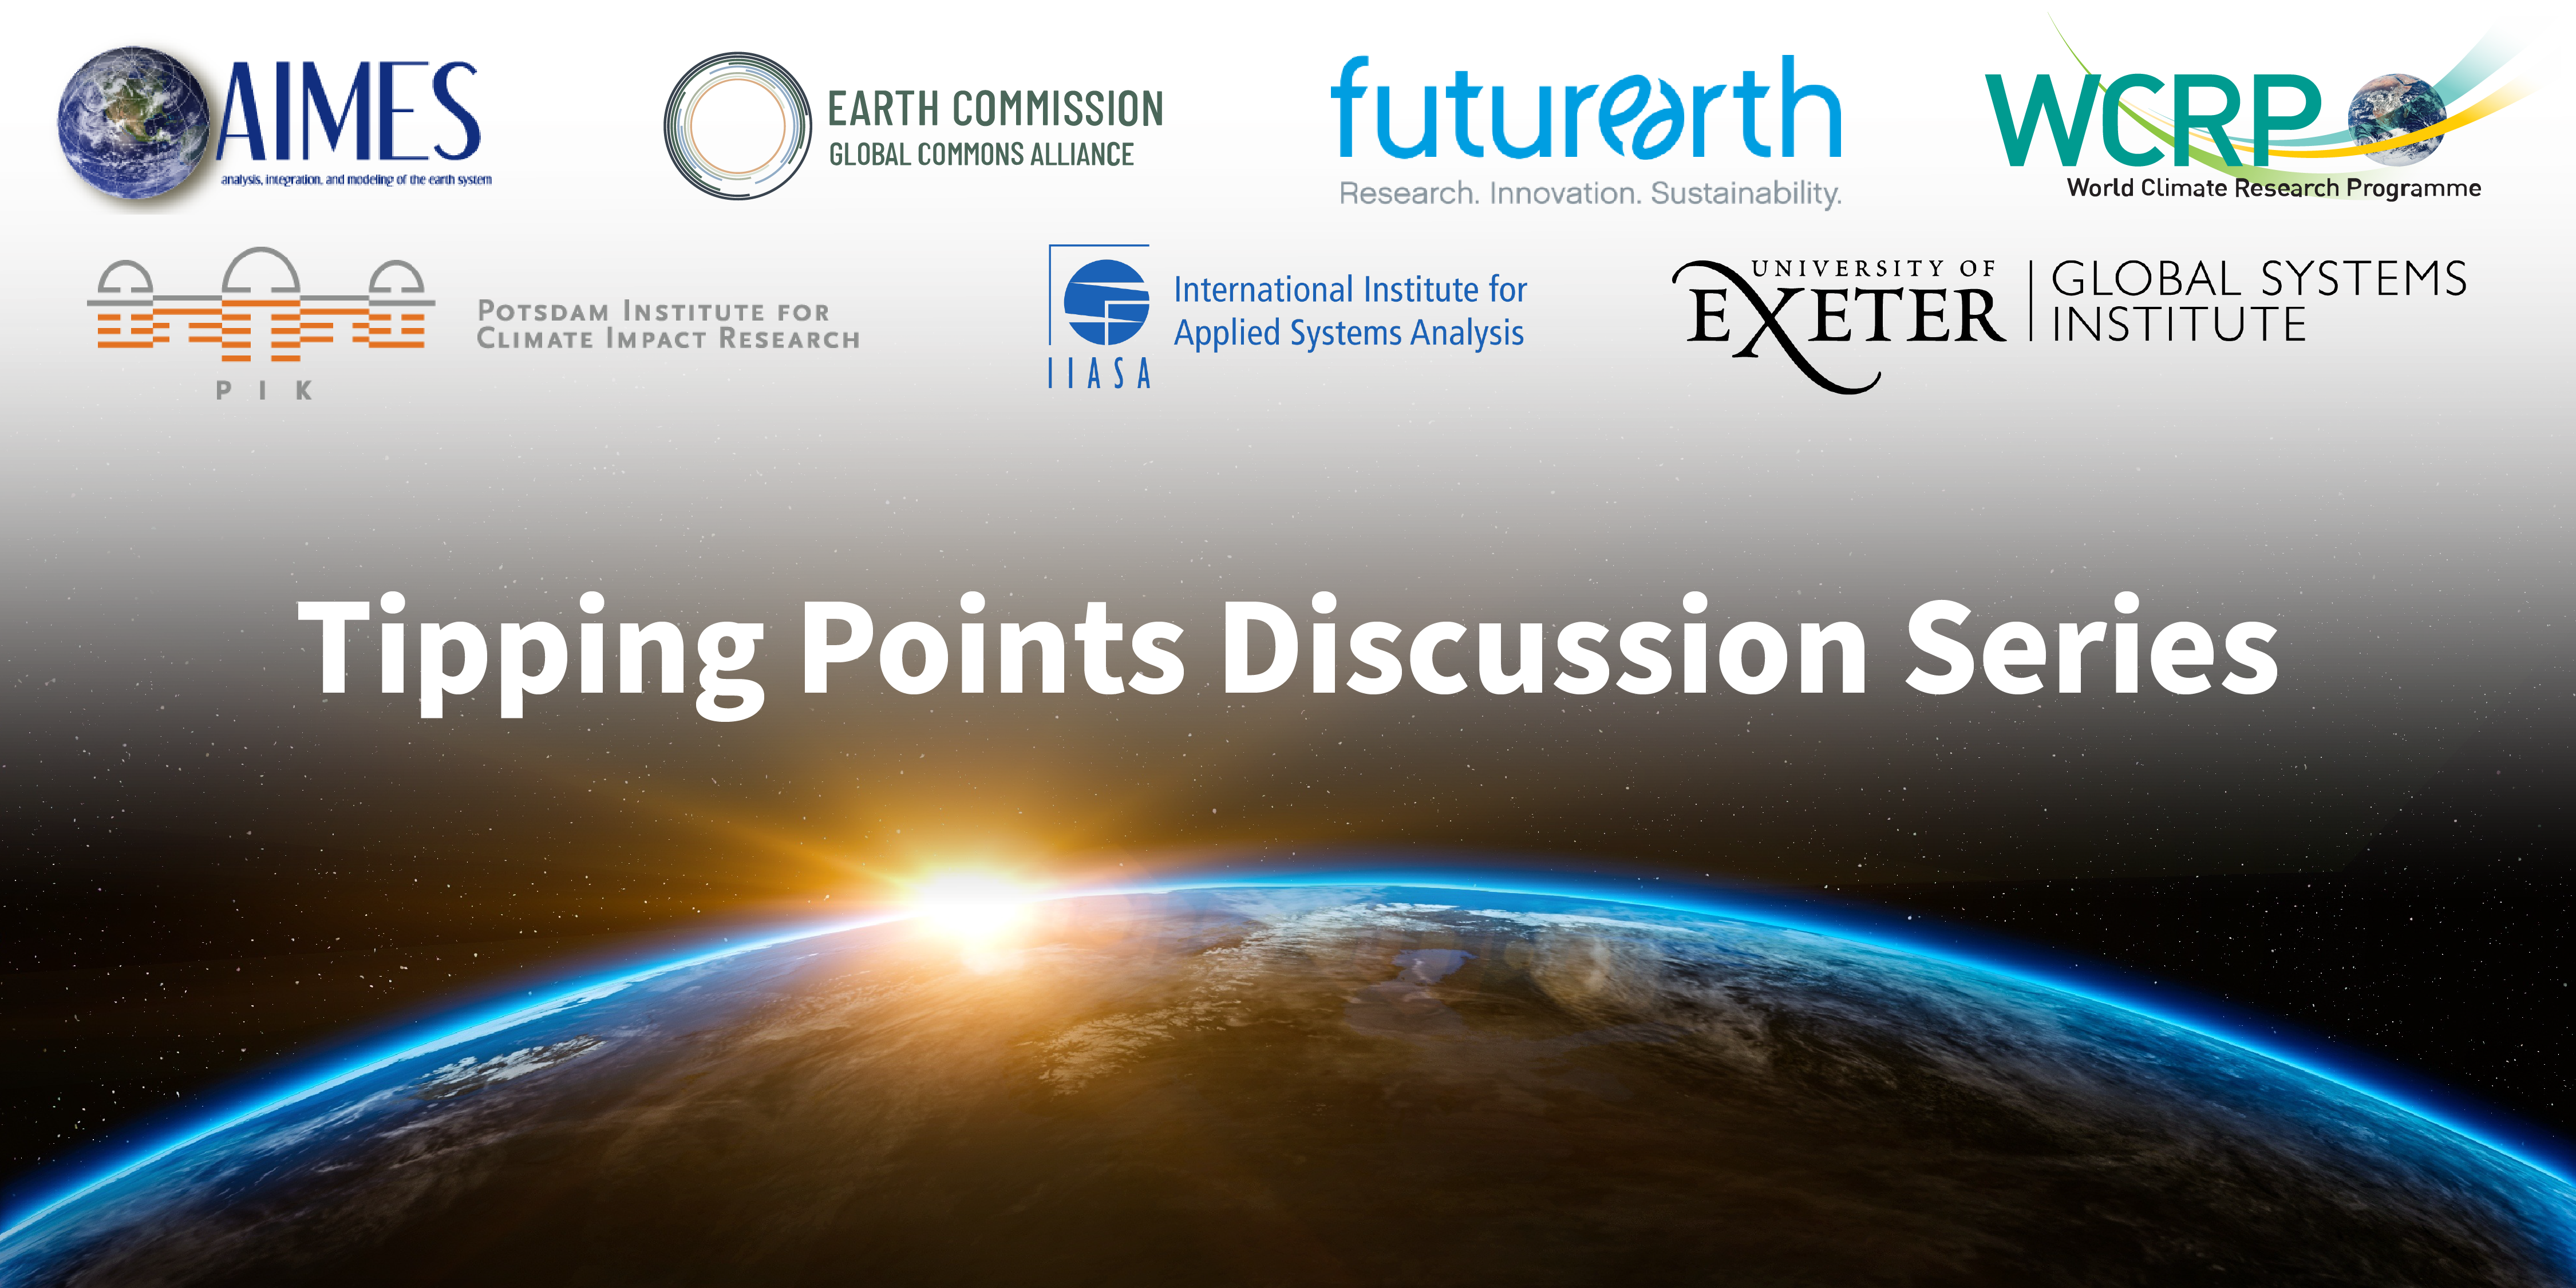 Tipping Points Discussion Series Overview Image